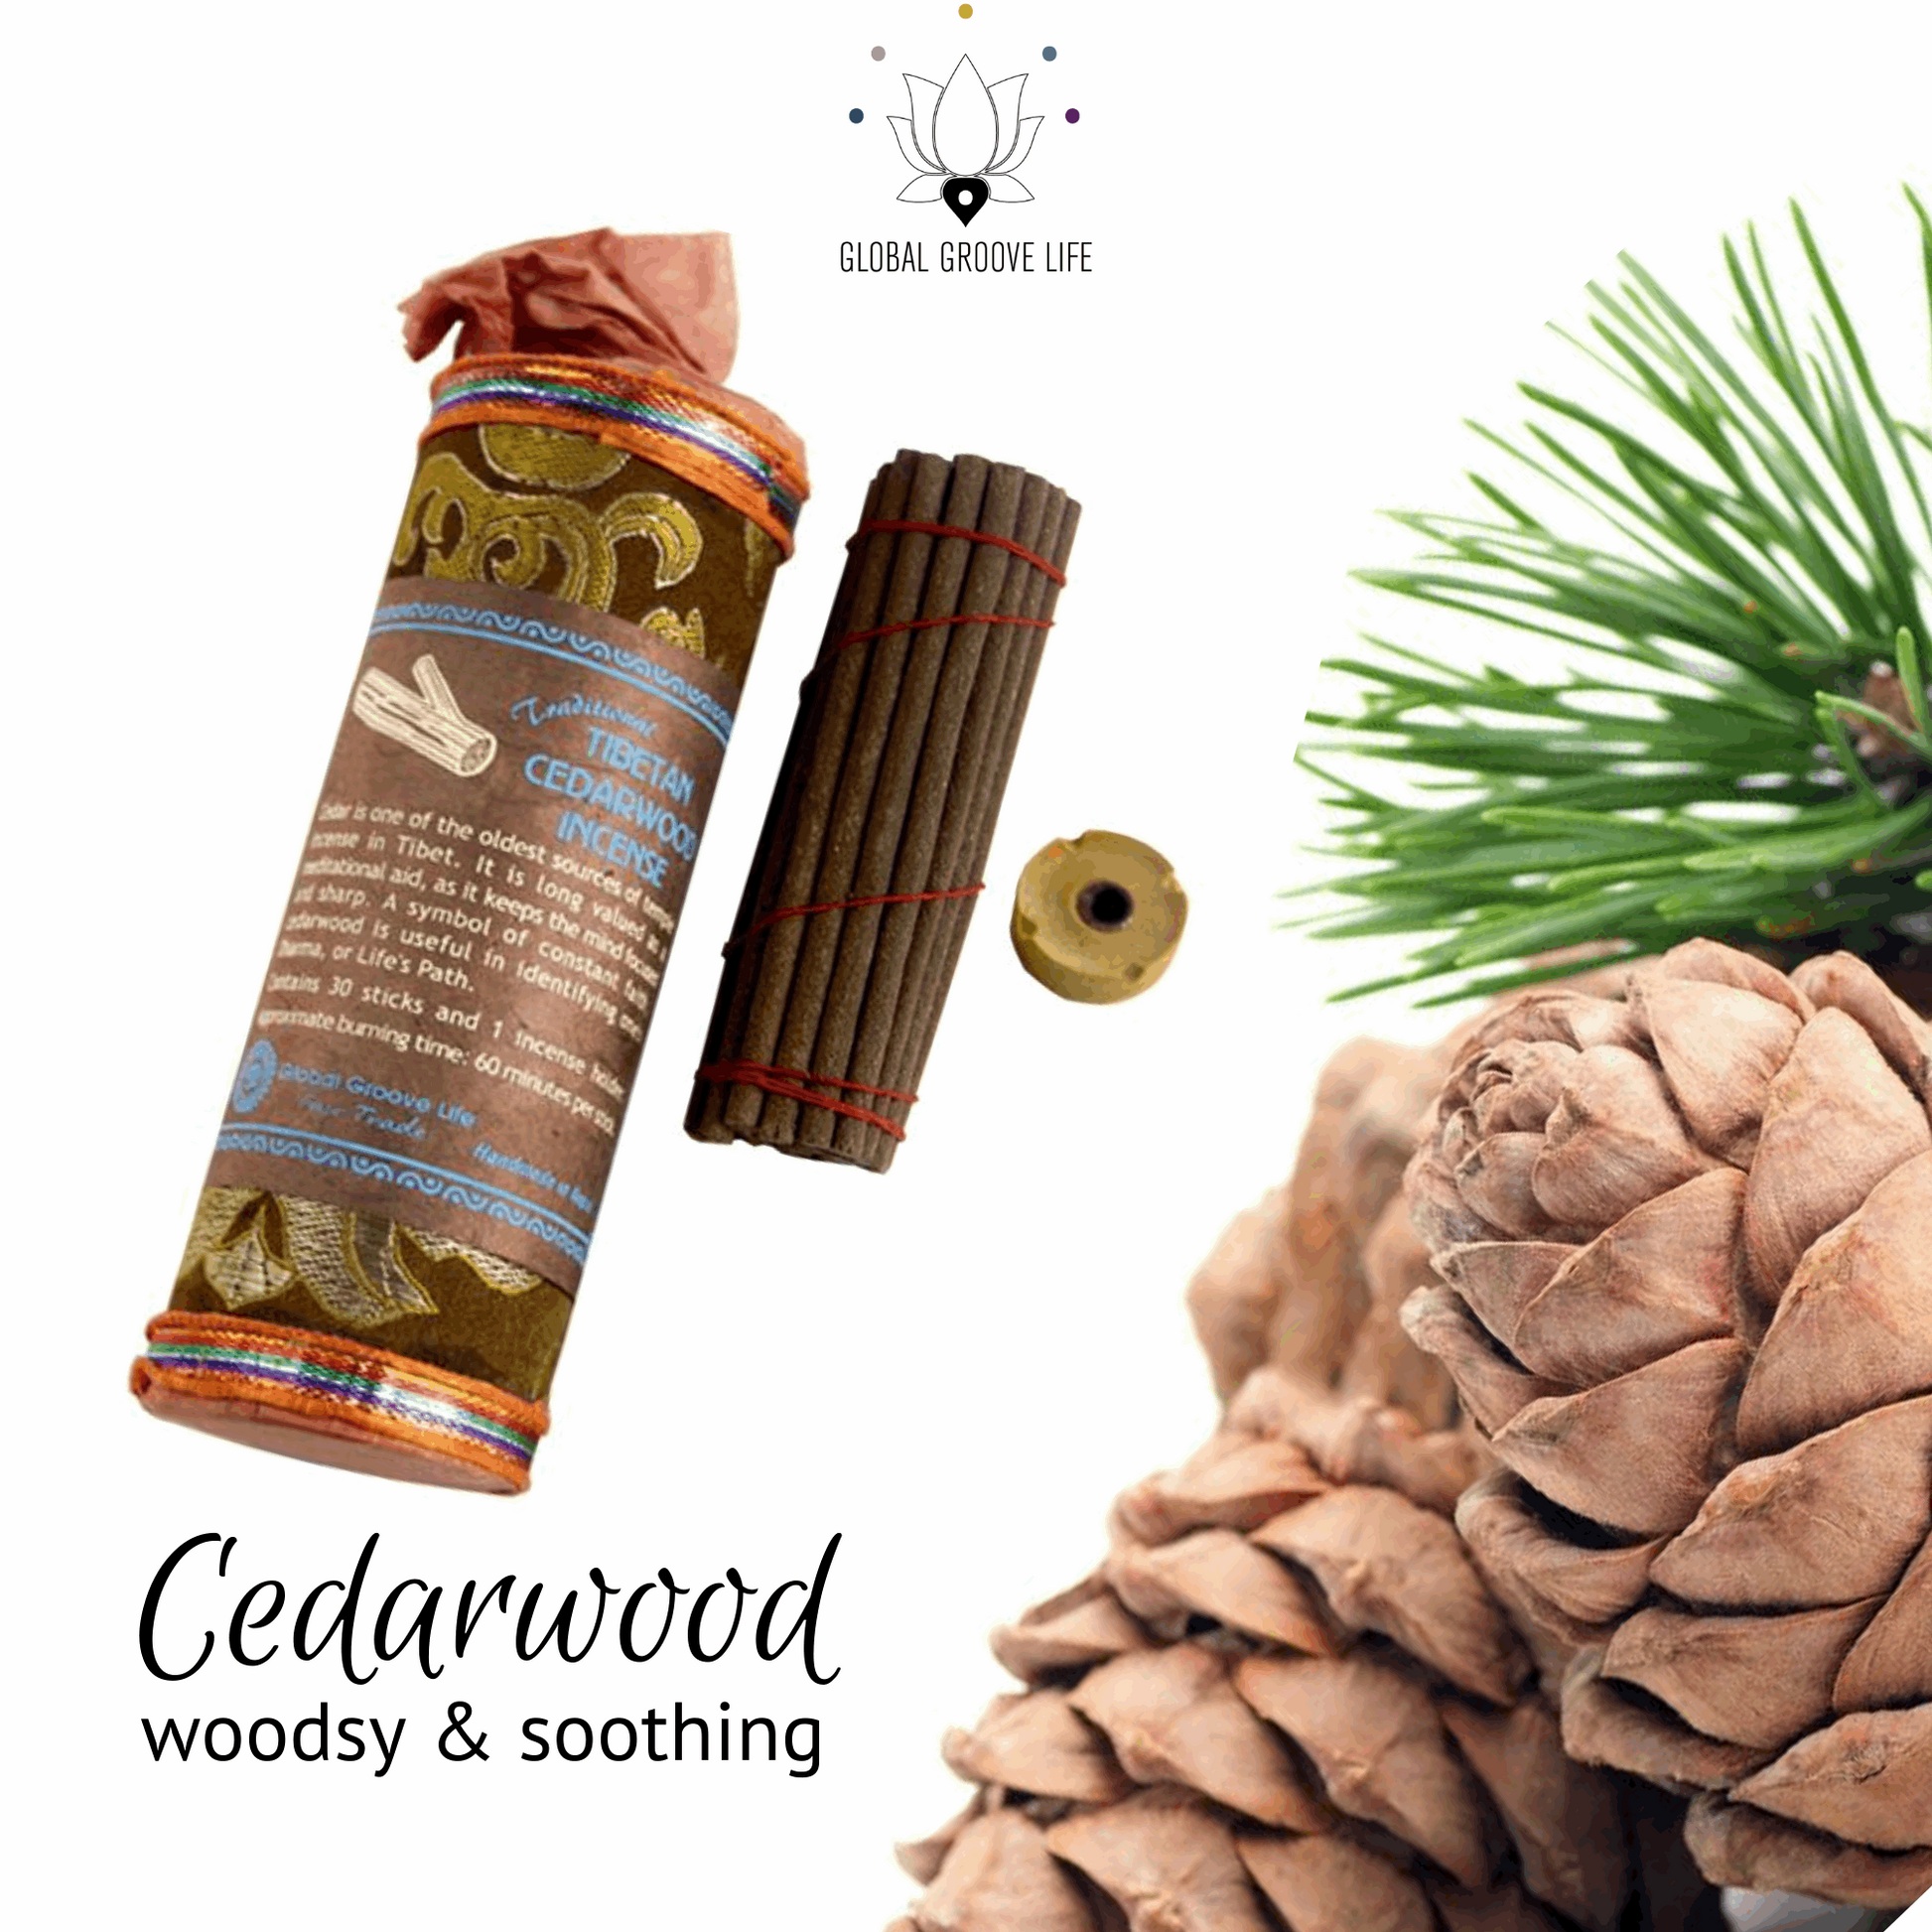 Cedarwood Incense - All-natural handmade tibetan incense - Fairtrade Incense - Soothing and woodsy fragrance